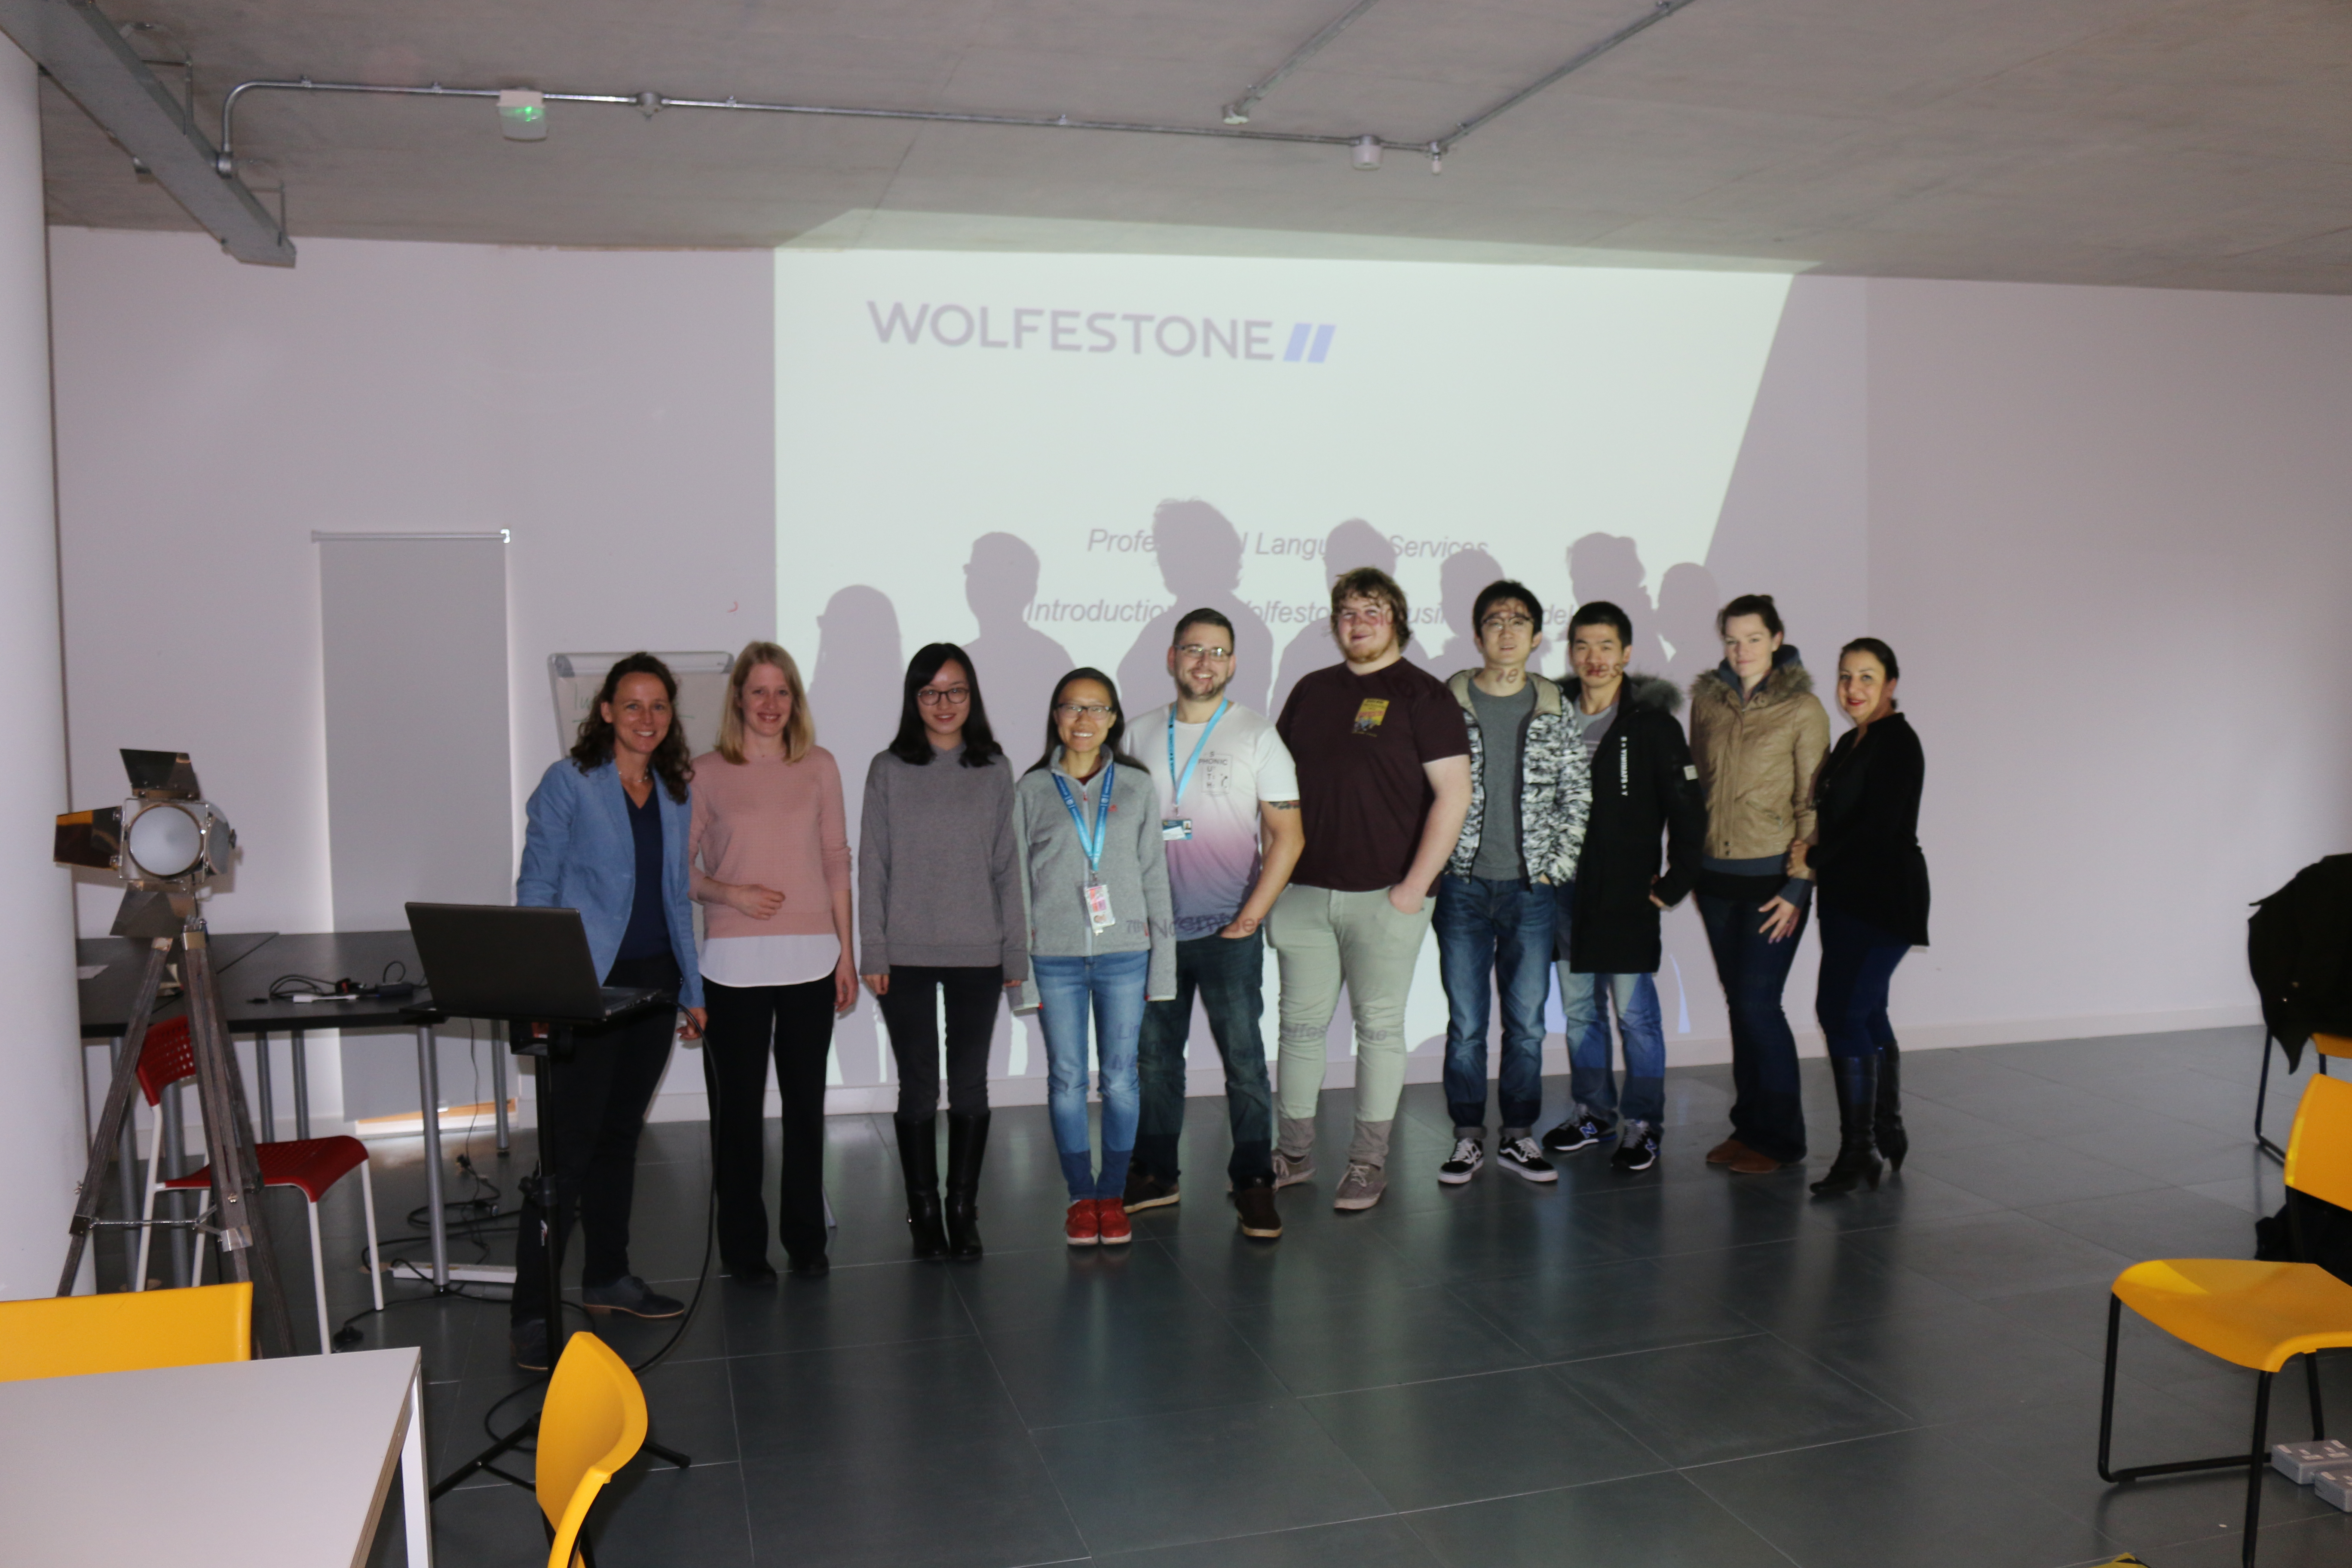 Group photo of students and Wolfestone's Linda Roper.